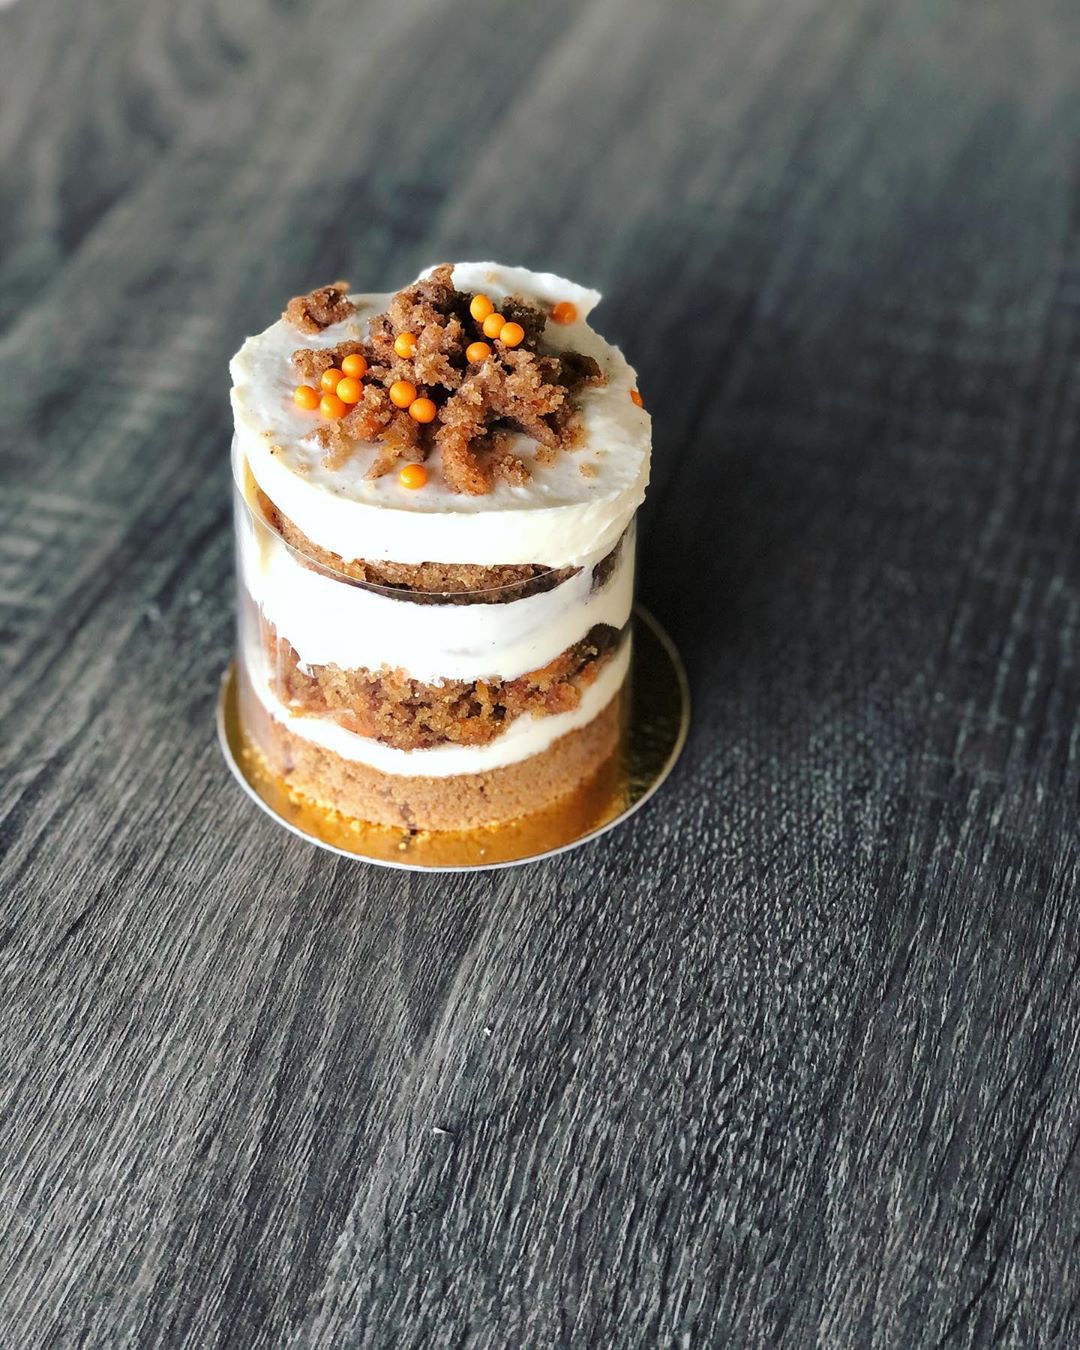 Carrot Cake Super Chunk Sweets & Treats gourmet shops in Scottsdale